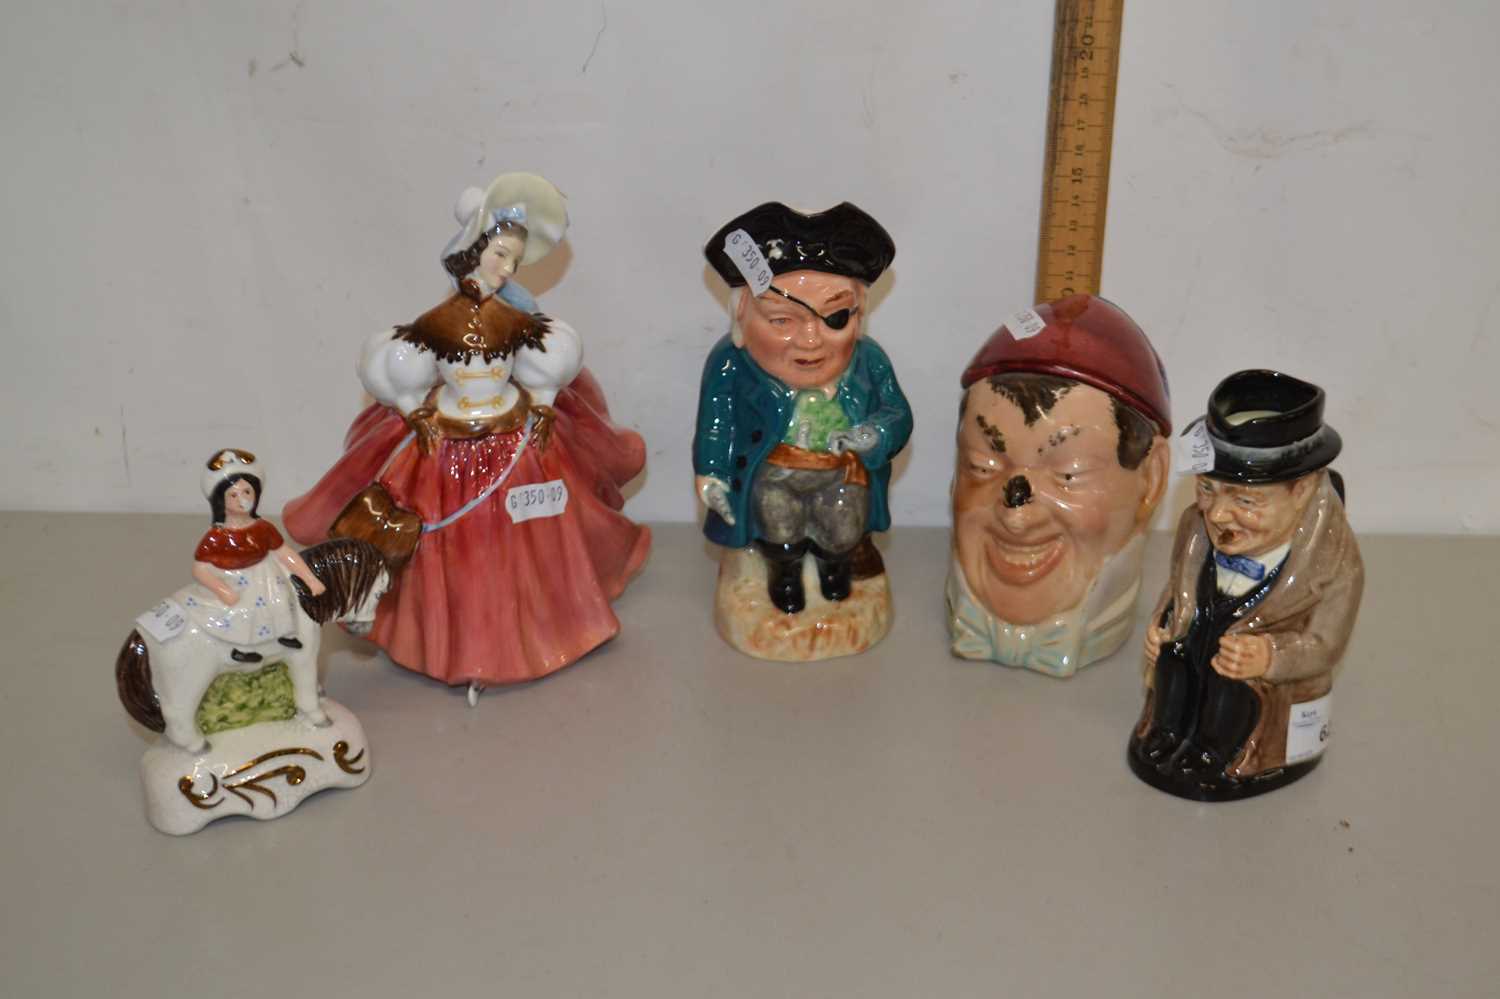 Mixed Lot: A Royal Doulton figurine The Skater together with a Royal Doulton Winston Churchill jug